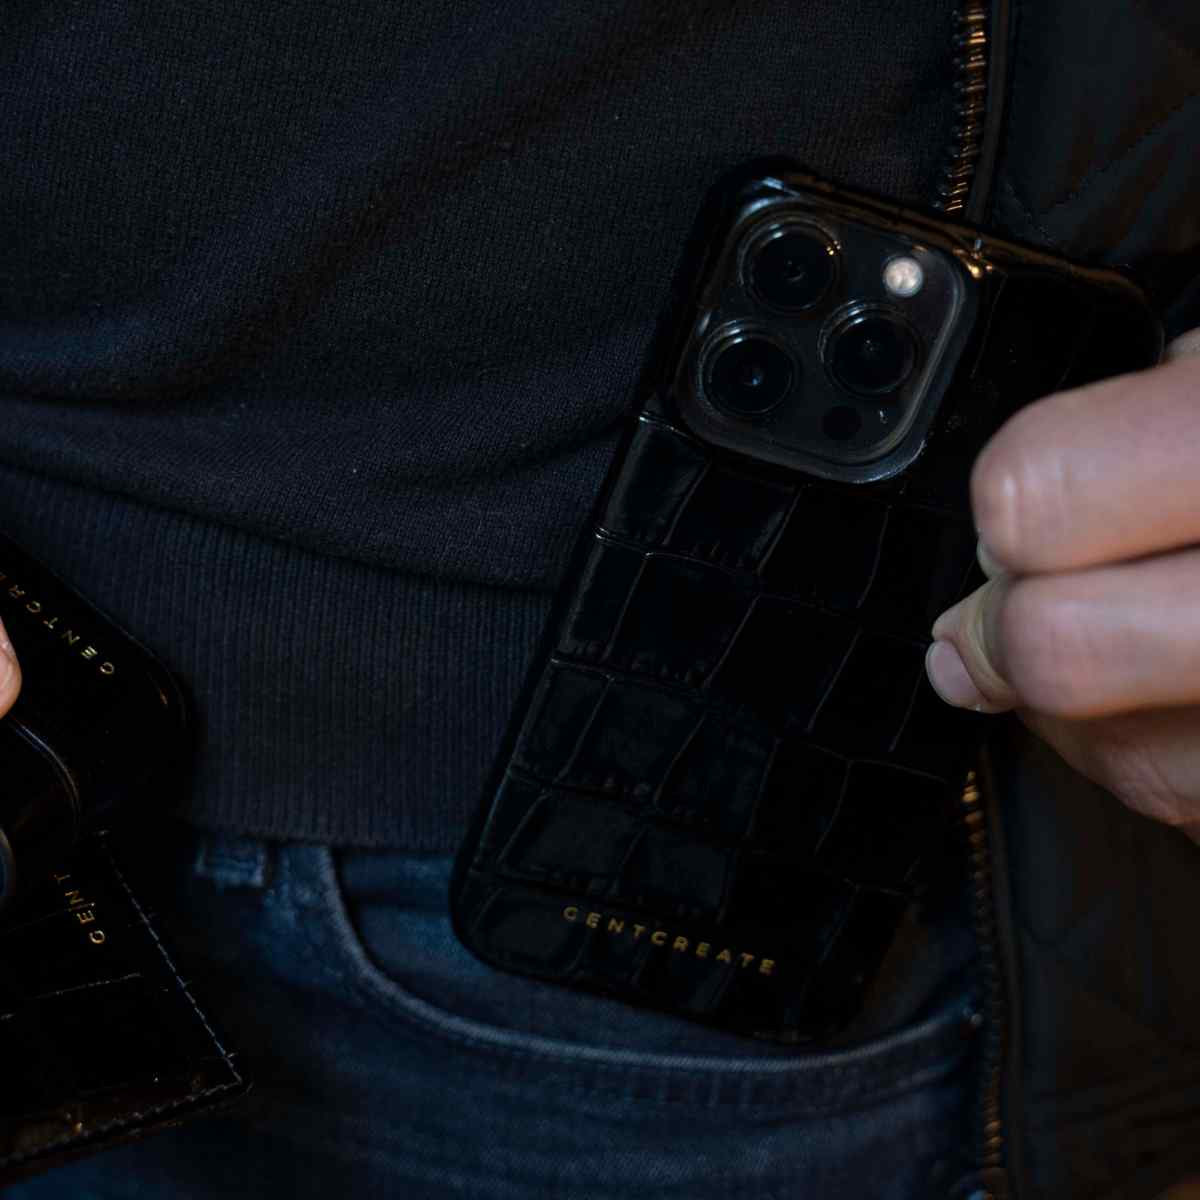 The man is putting a black Glossy leather iPhone 11 Case By gentcreate into the pocket of his jeans